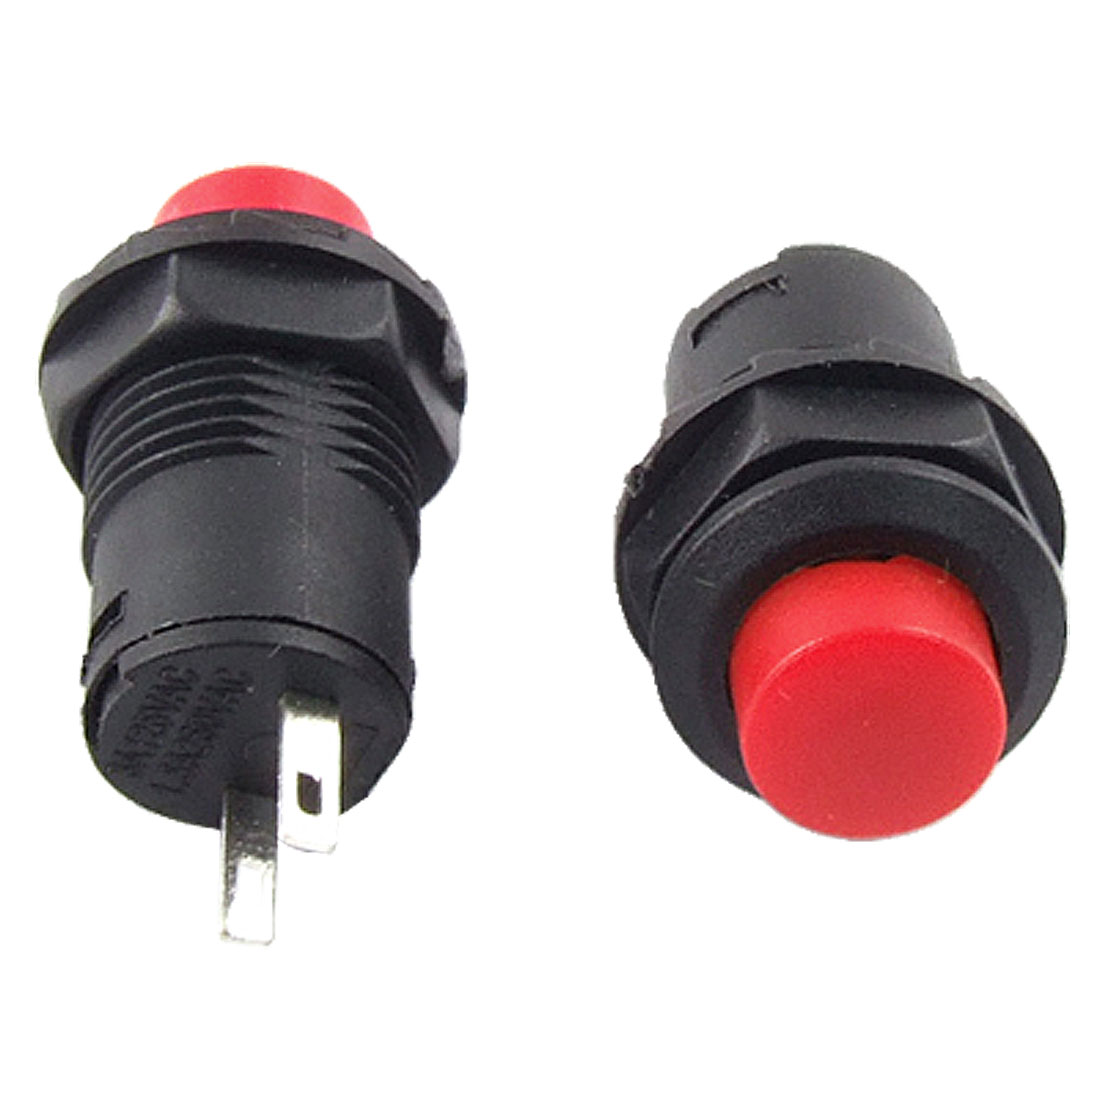 Unique Bargains 10 Pcs 2 Pin SPST OFF(ON) N/O NO Red Round Momentary Push Button Switch Non Lock